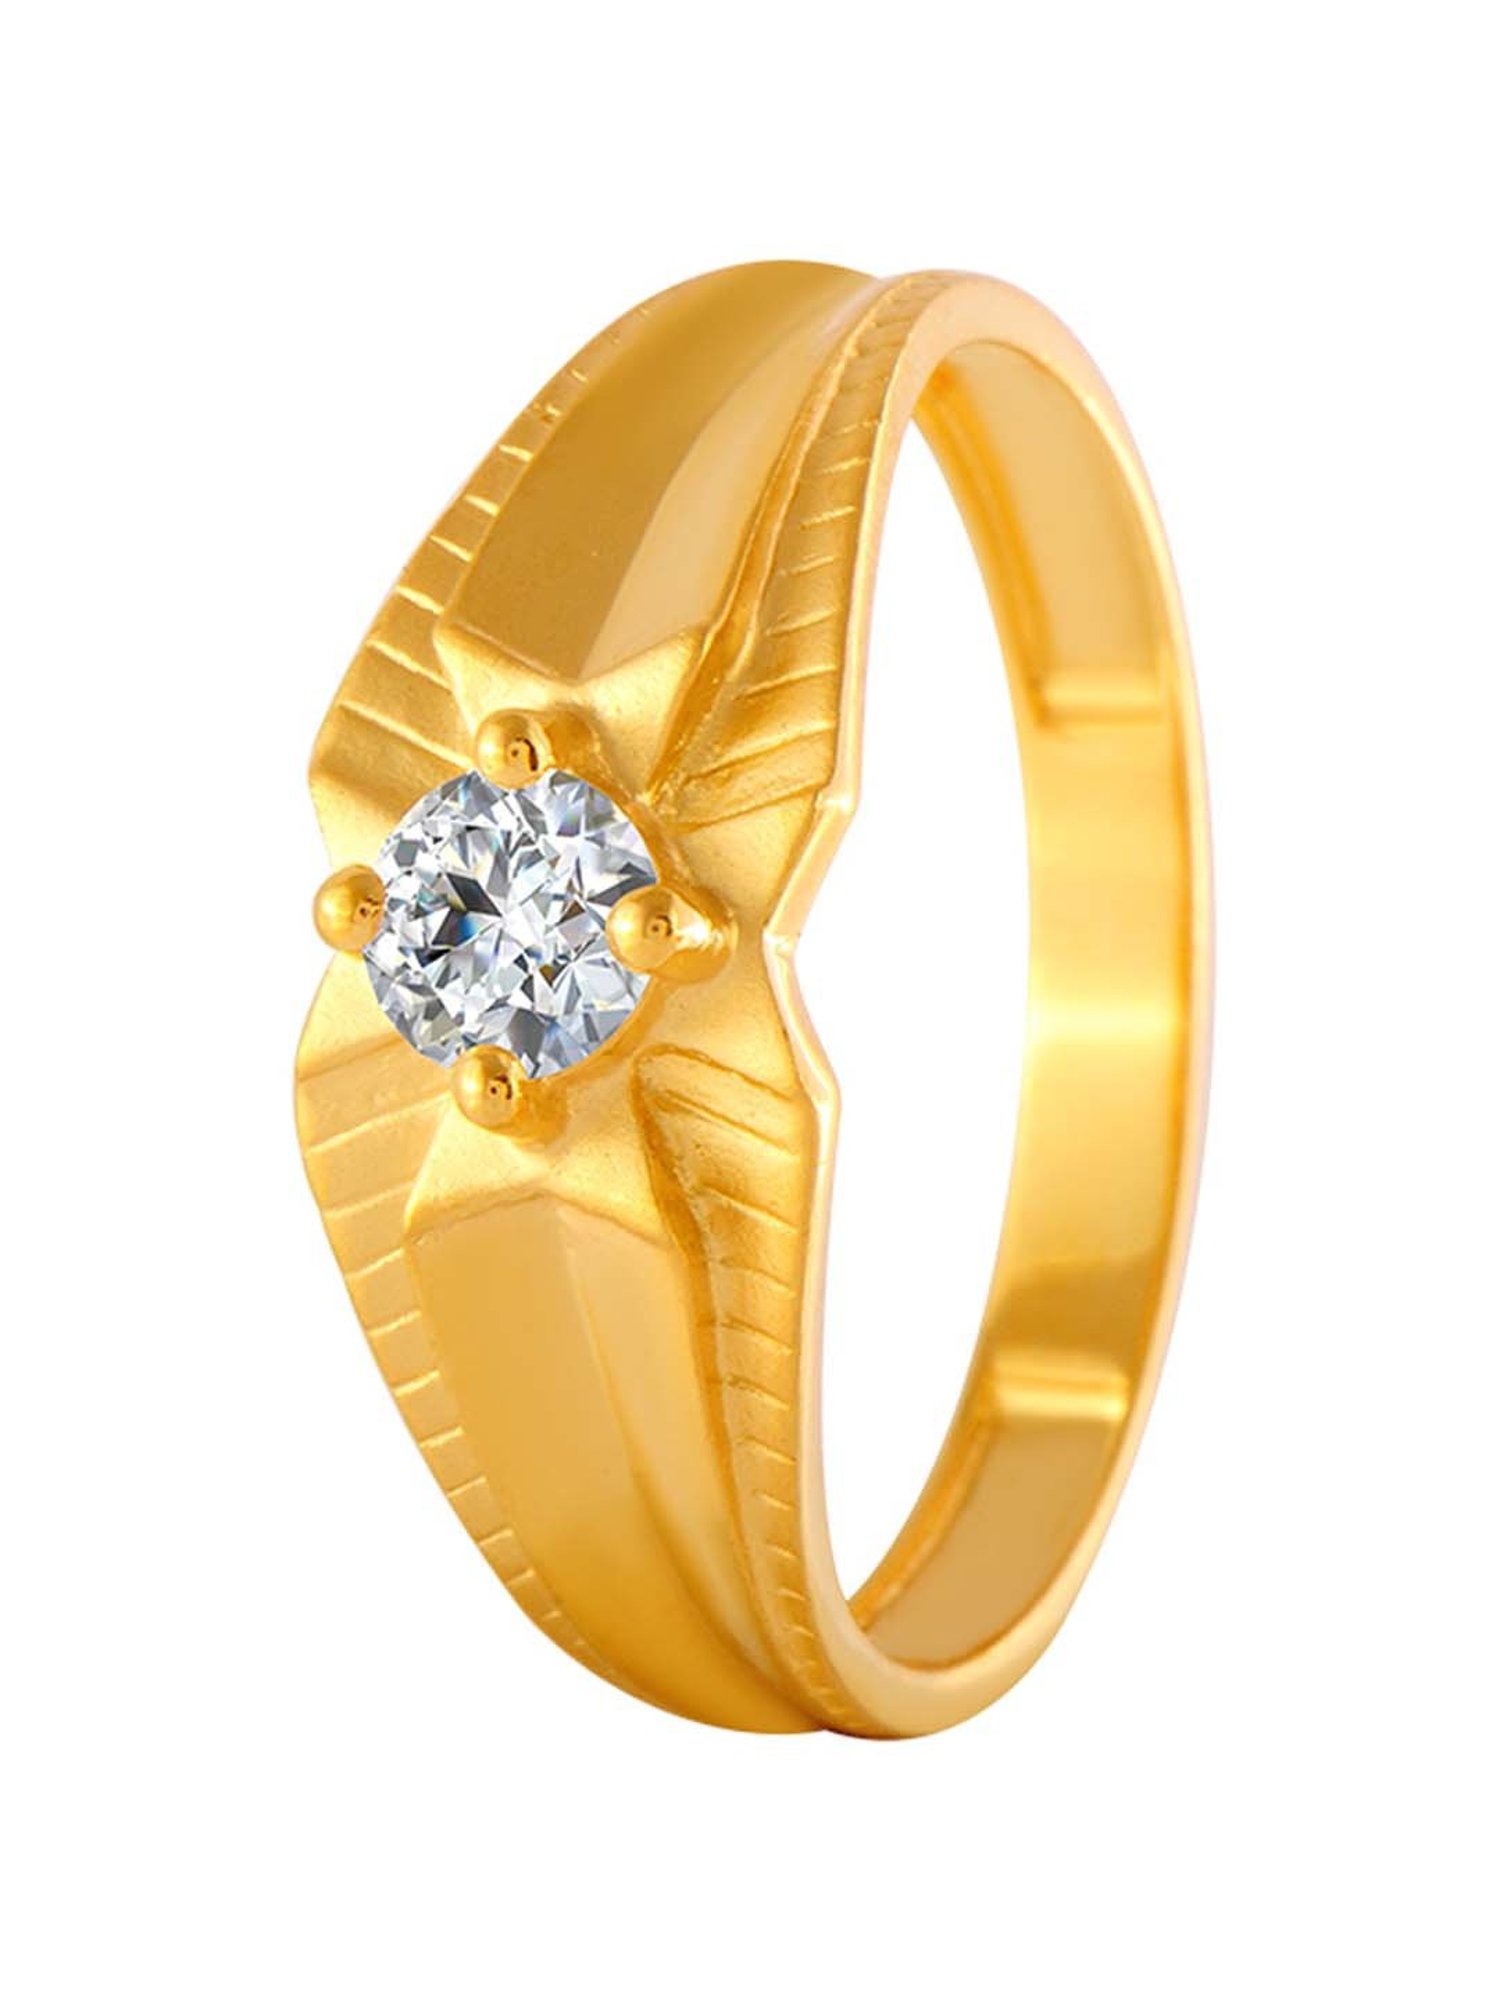 PC Chandra Jewellers DIAMOND COLLECTION 14kt Yellow Gold ring Price in  India - Buy PC Chandra Jewellers DIAMOND COLLECTION 14kt Yellow Gold ring  online at Flipkart.com